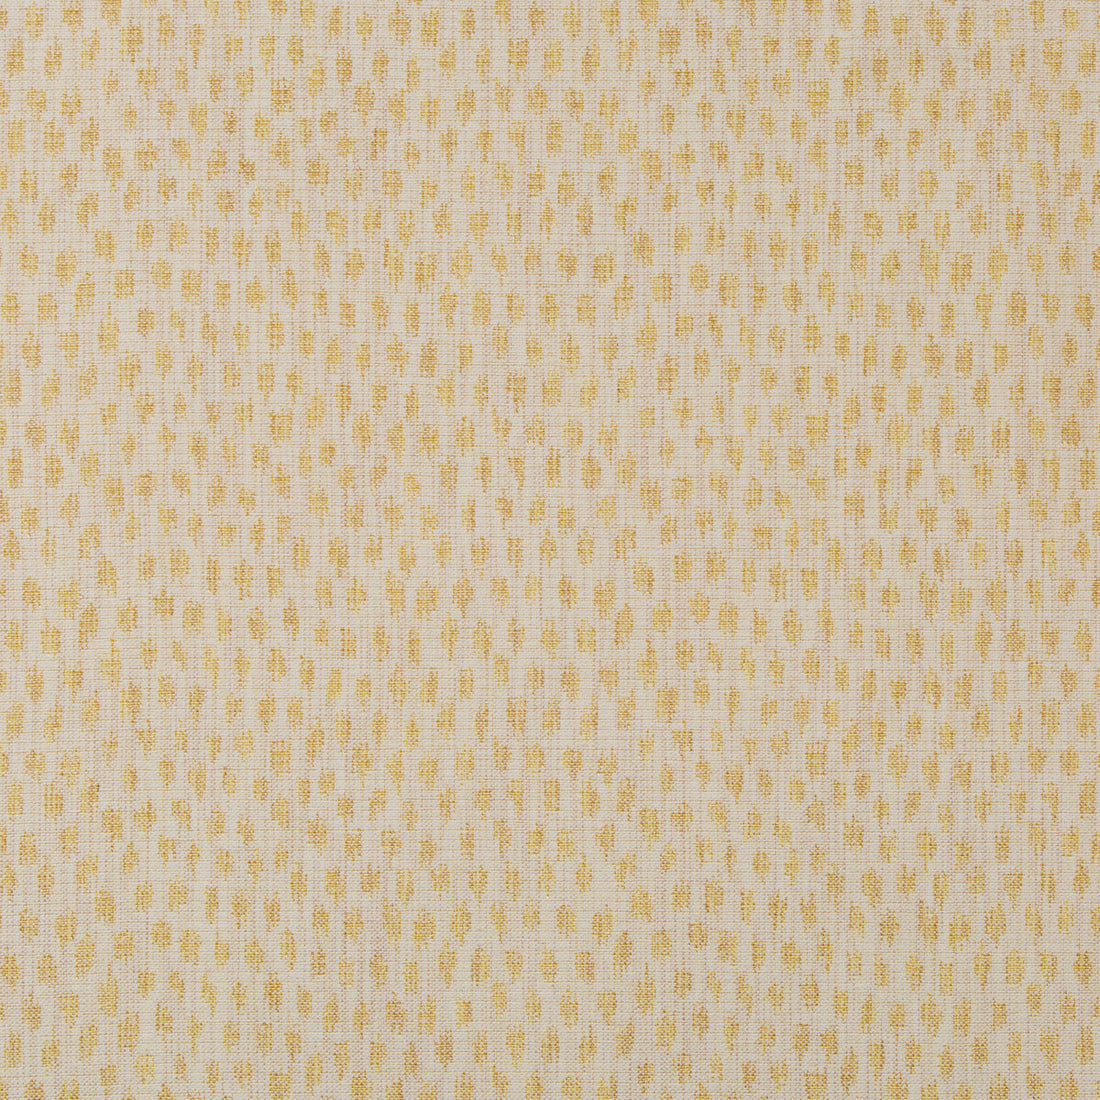 Kemble fabric in yellow color - pattern BFC-3683.40.0 - by Lee Jofa in the Blithfield collection